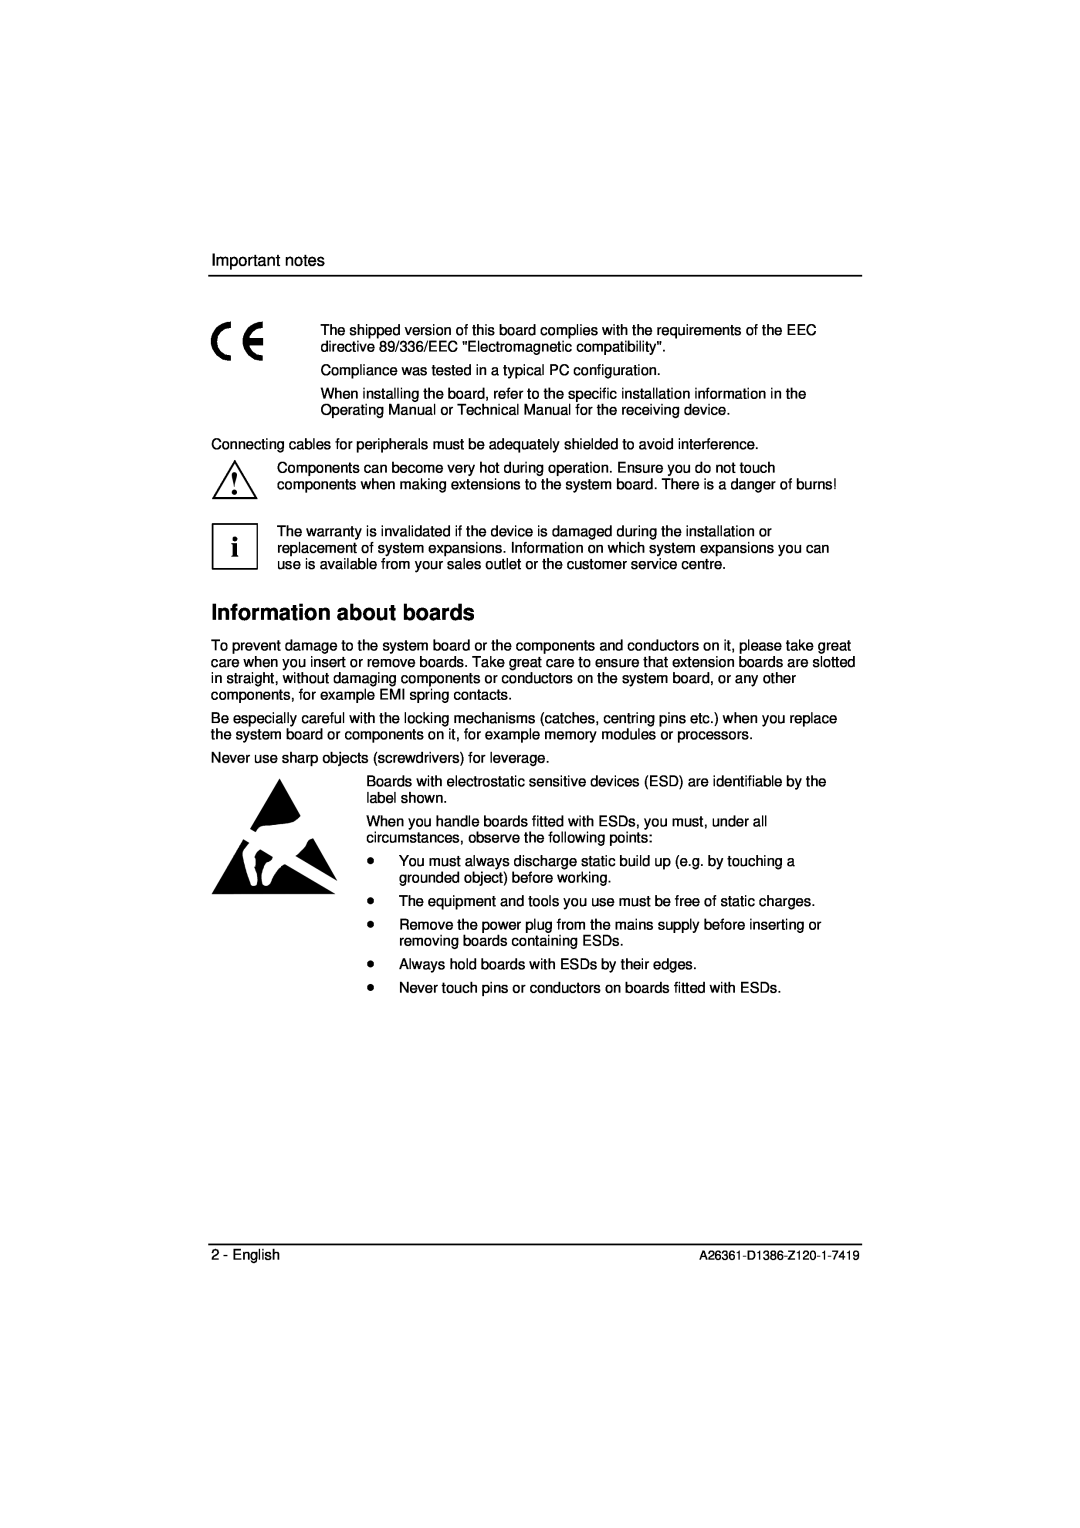 Fujitsu D1386 technical manual Information about boards, Important notes 